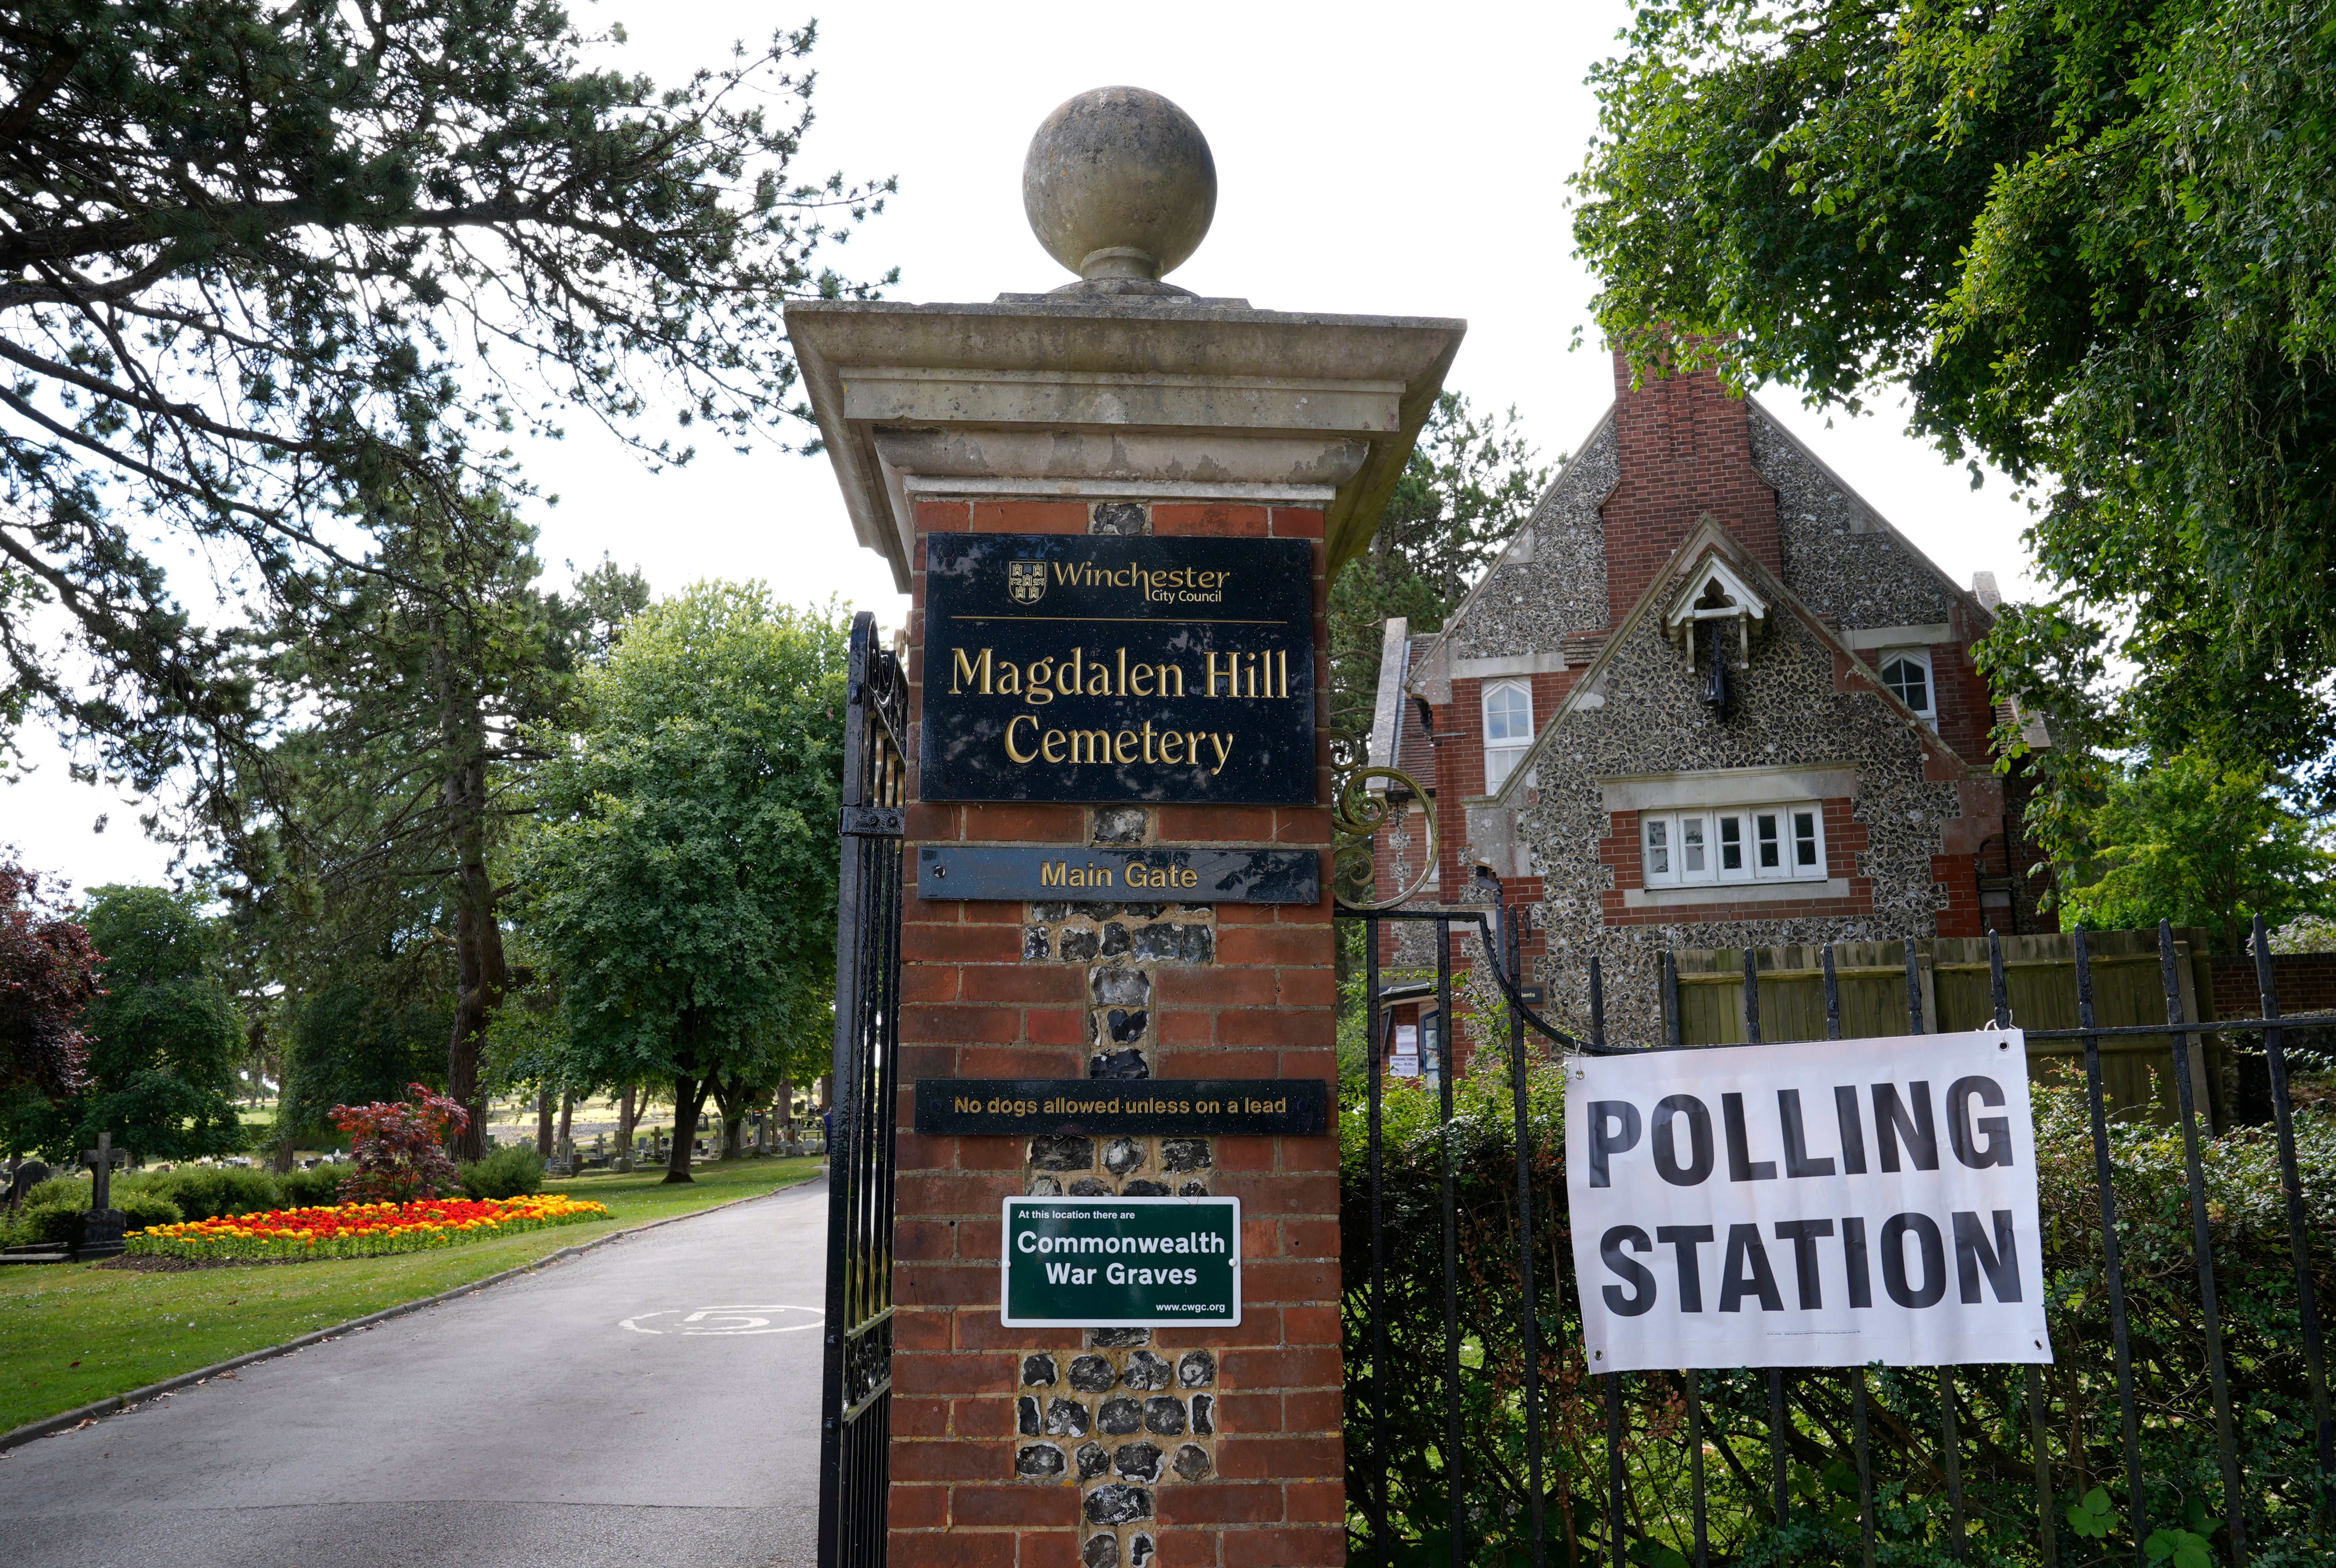 A sign for a polling station at Magdalen Hill Cemetery near Winchester, Hampshire